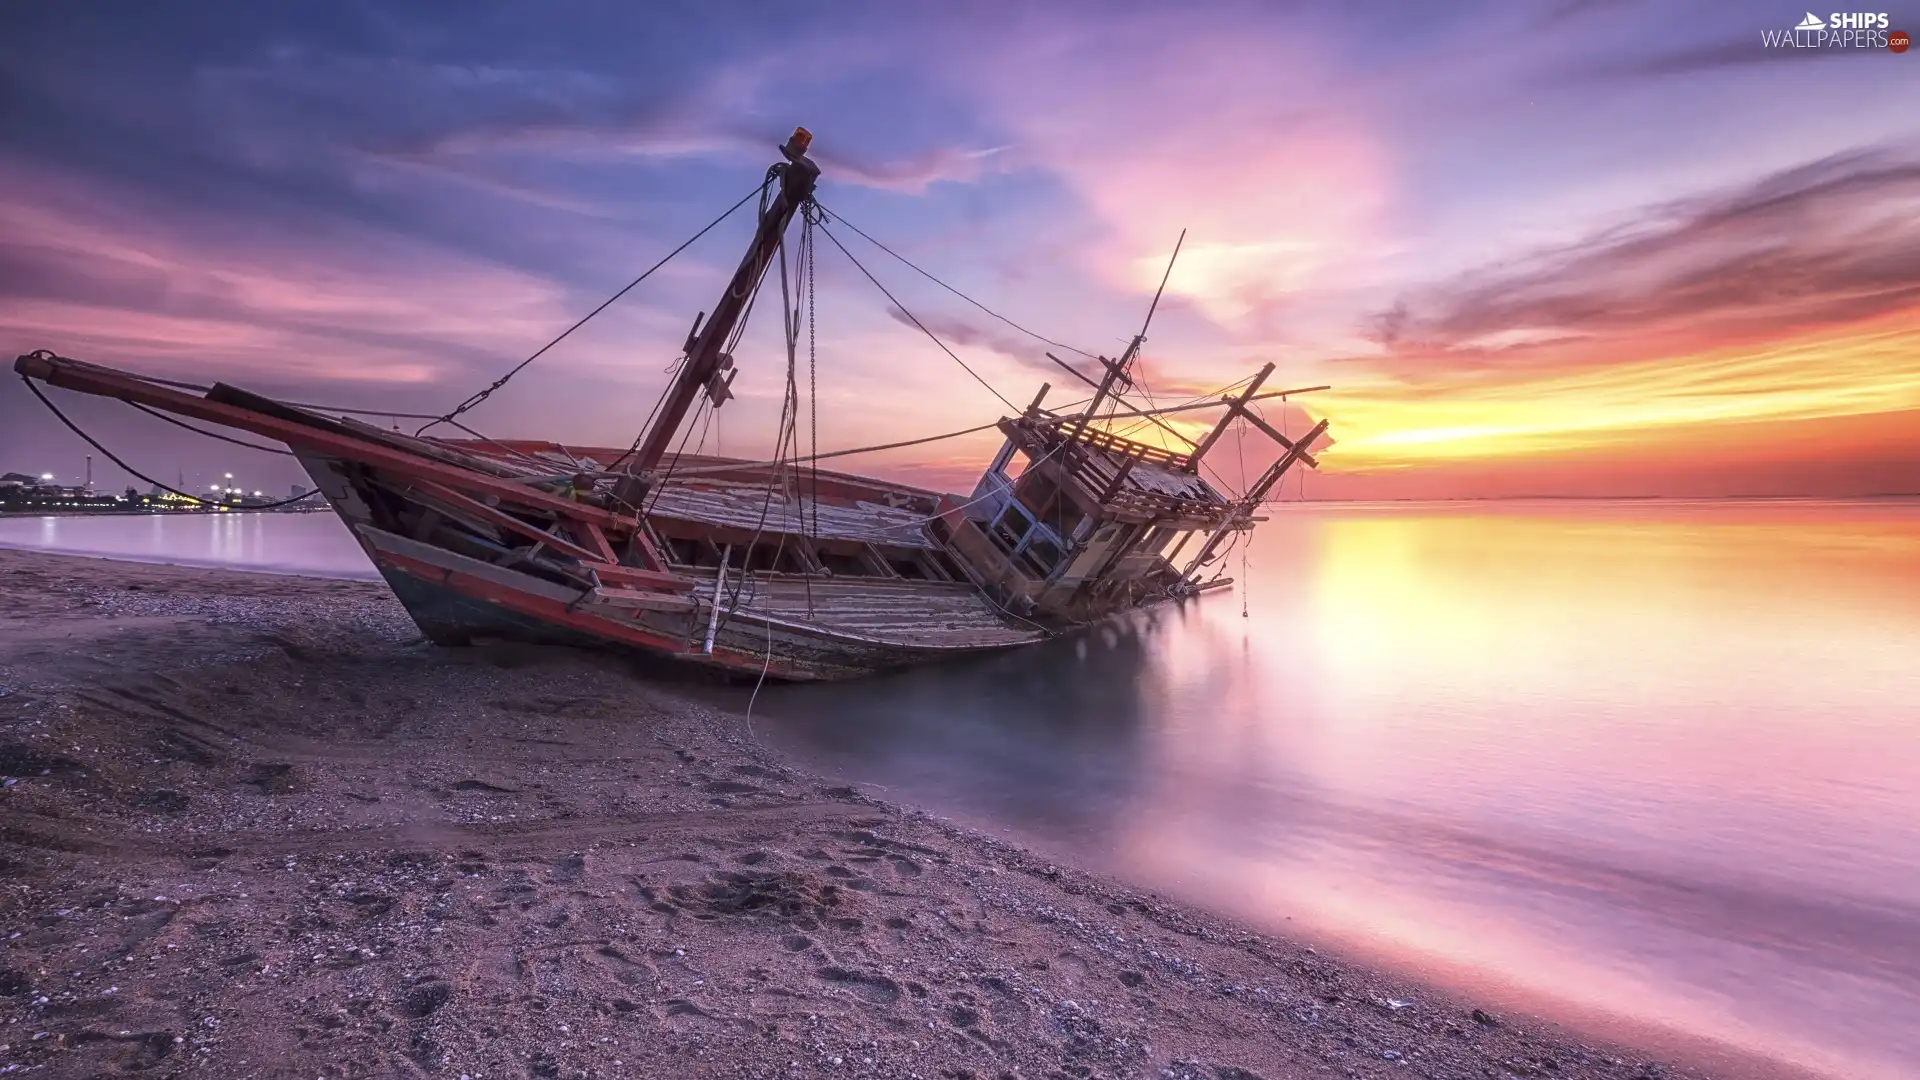 Sand, Great Sunsets, Boat, wreck, sea, Beaches